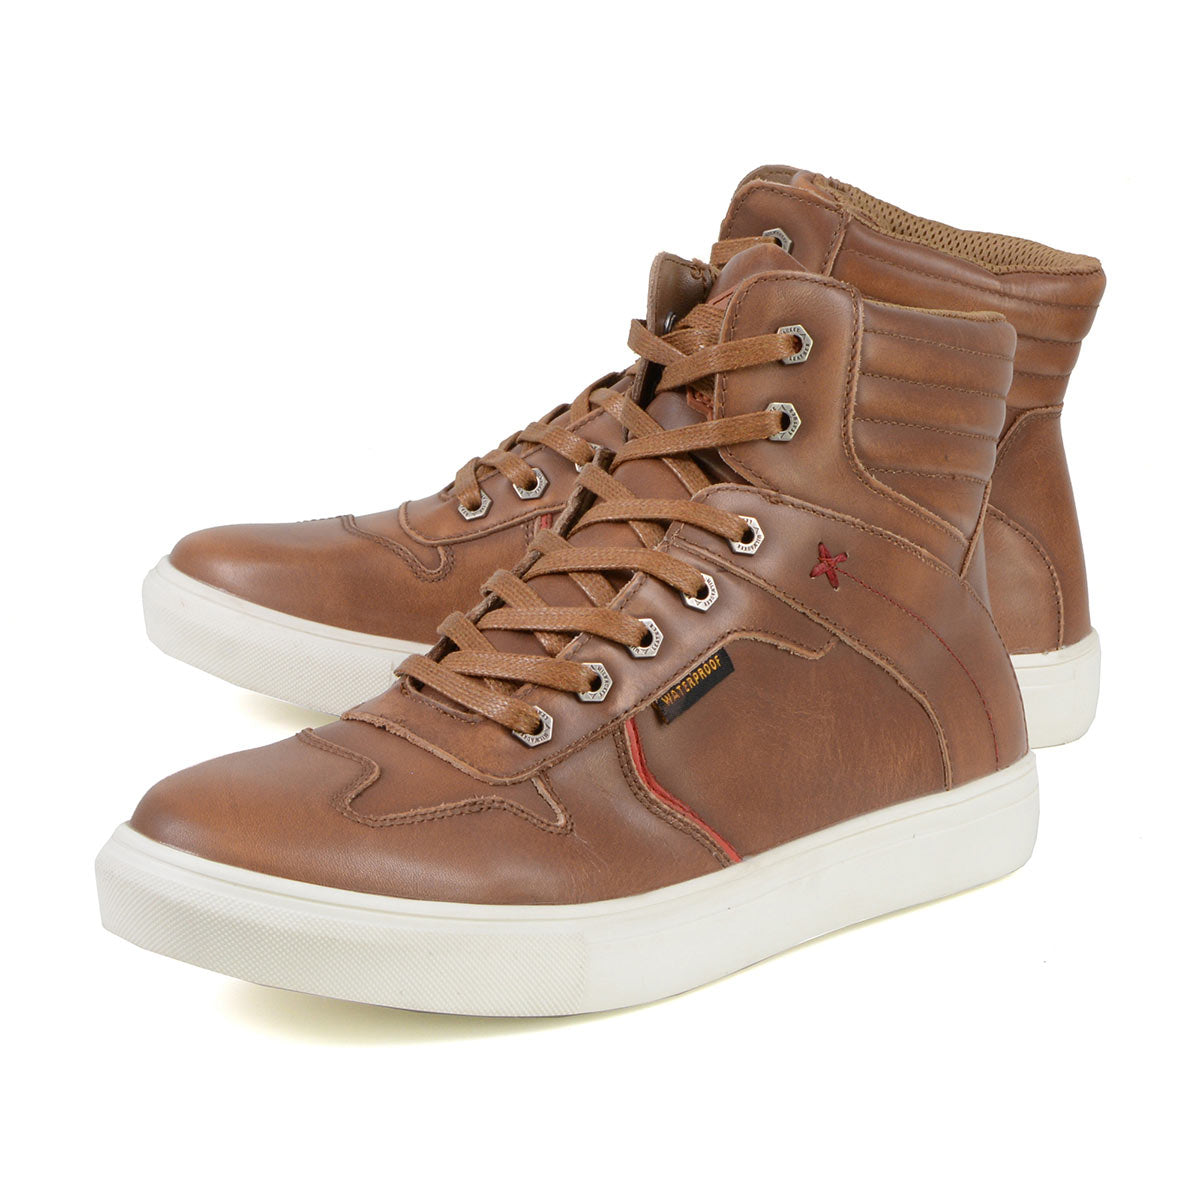 Milwaukee Leather MBM9154 Men's Cognac Leather High-Top Reinforced Street Riding Waterproof Shoes with Ankle Support